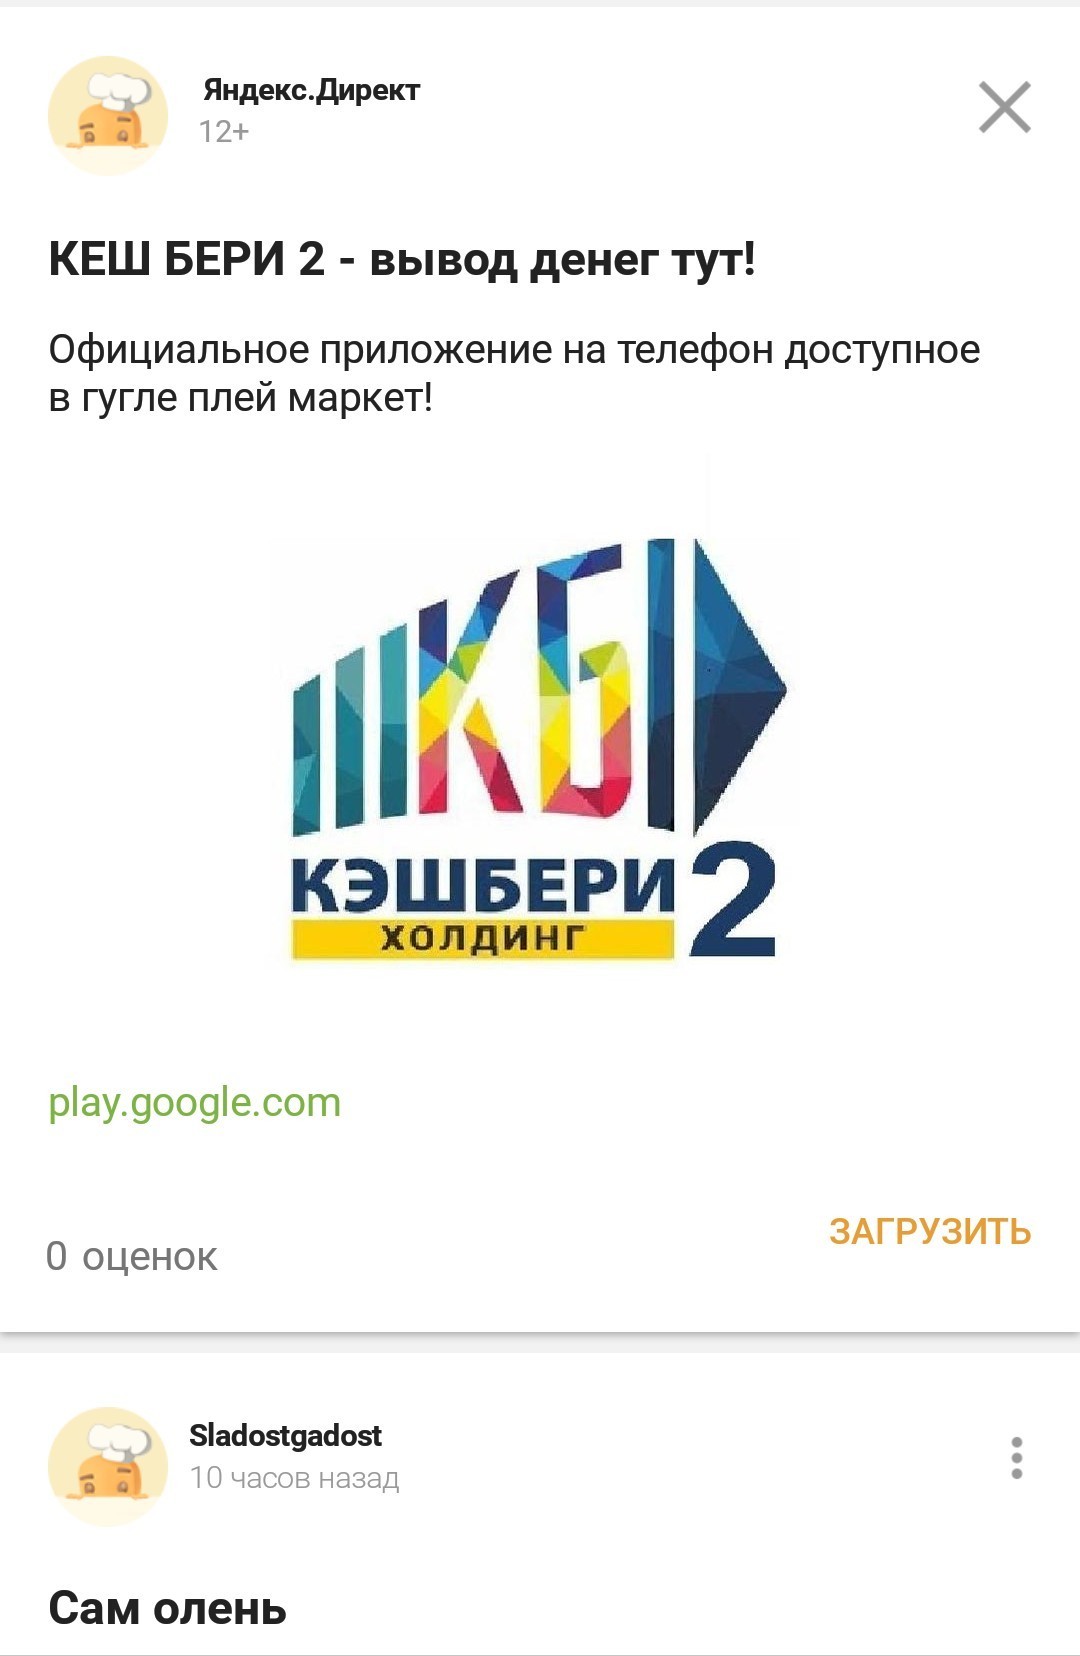 Yandex, well, did I give a reason to suspect me of idiocy? - Advertising, Cashbury, Yandex Direct